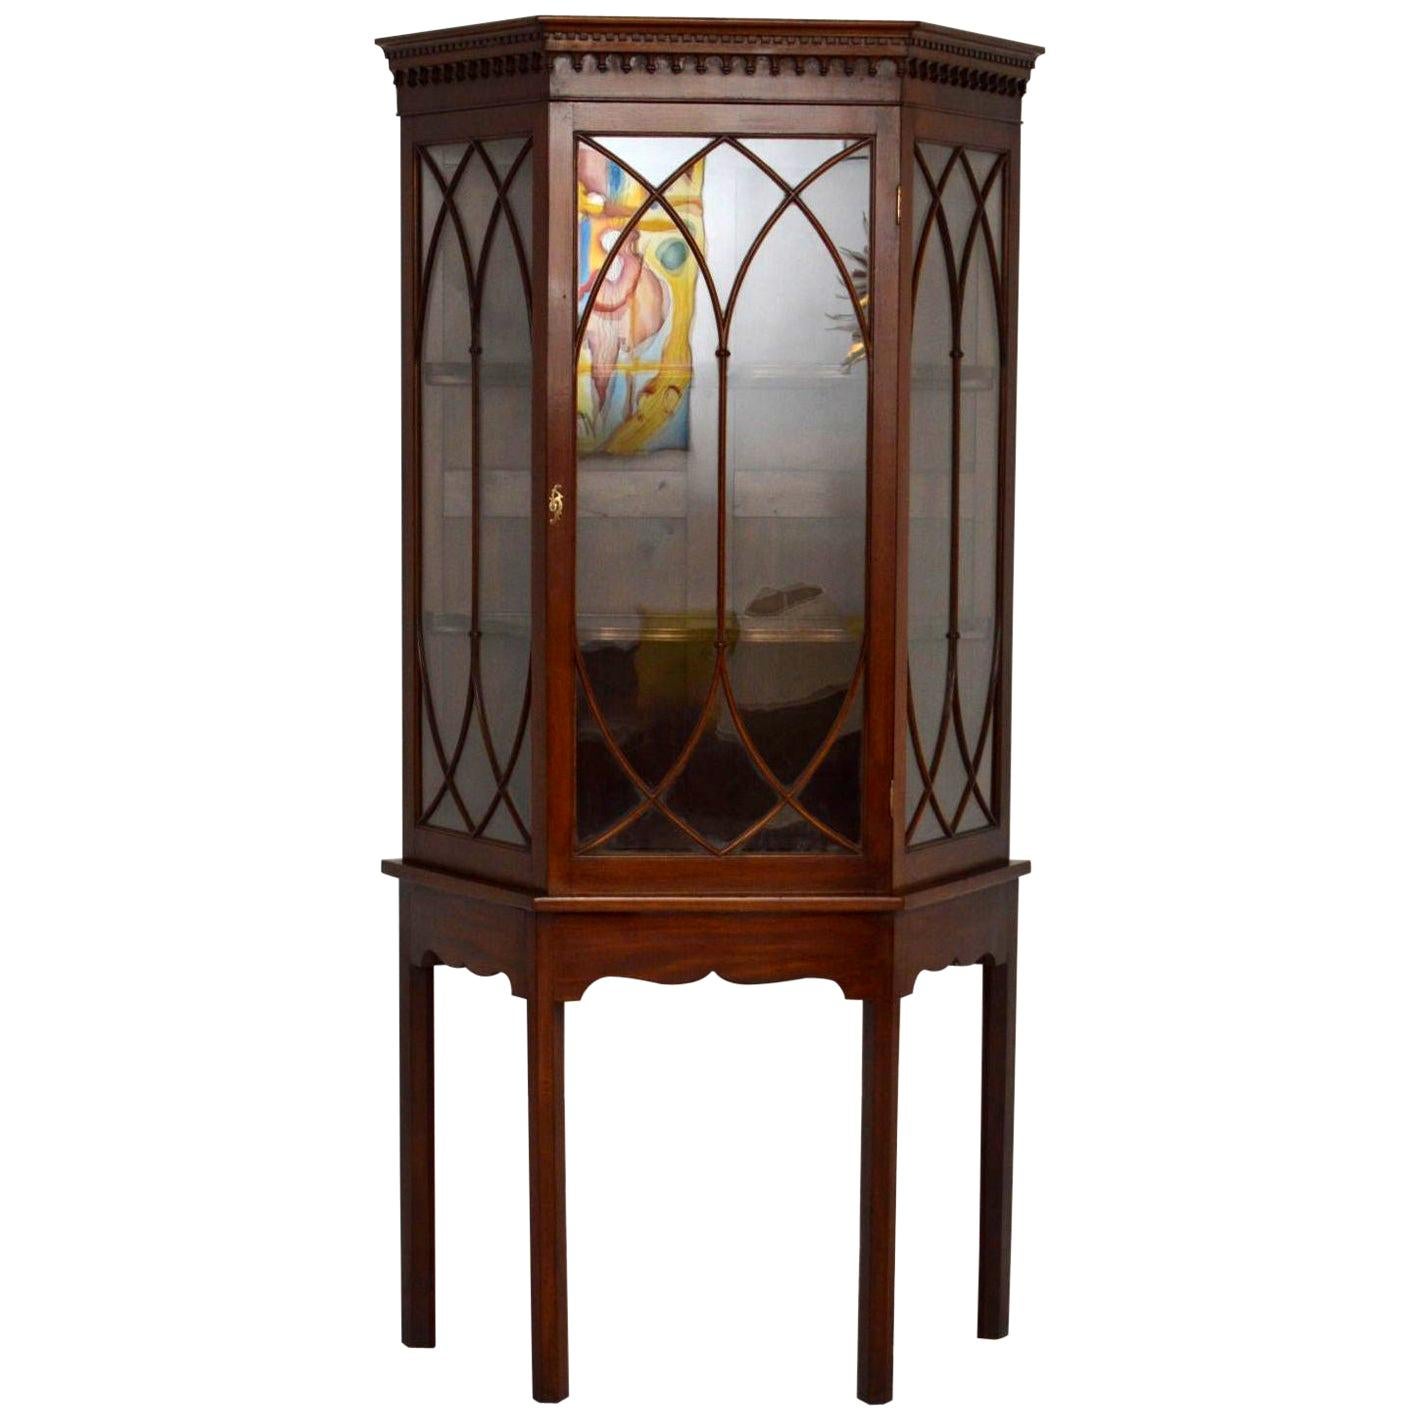 Antique Mahogany Display Cabinet on Stand